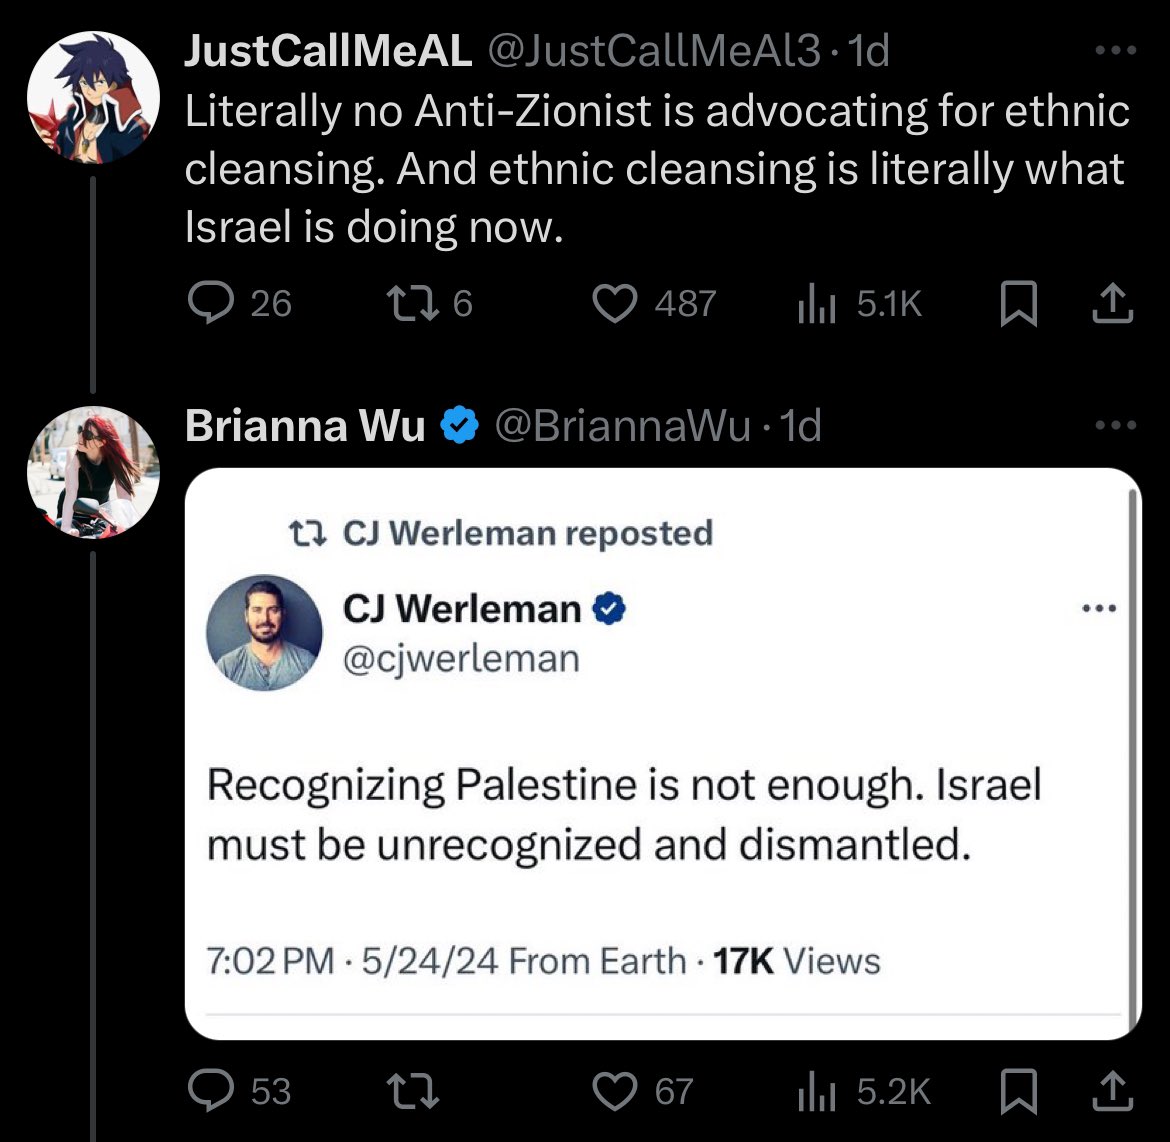 Did @BriannaWu just admit she thinks ending apartheid in South Africa was tantamount to an ethnic cleansing because it involved unrecognizing and dismantling the White Nationalist government?